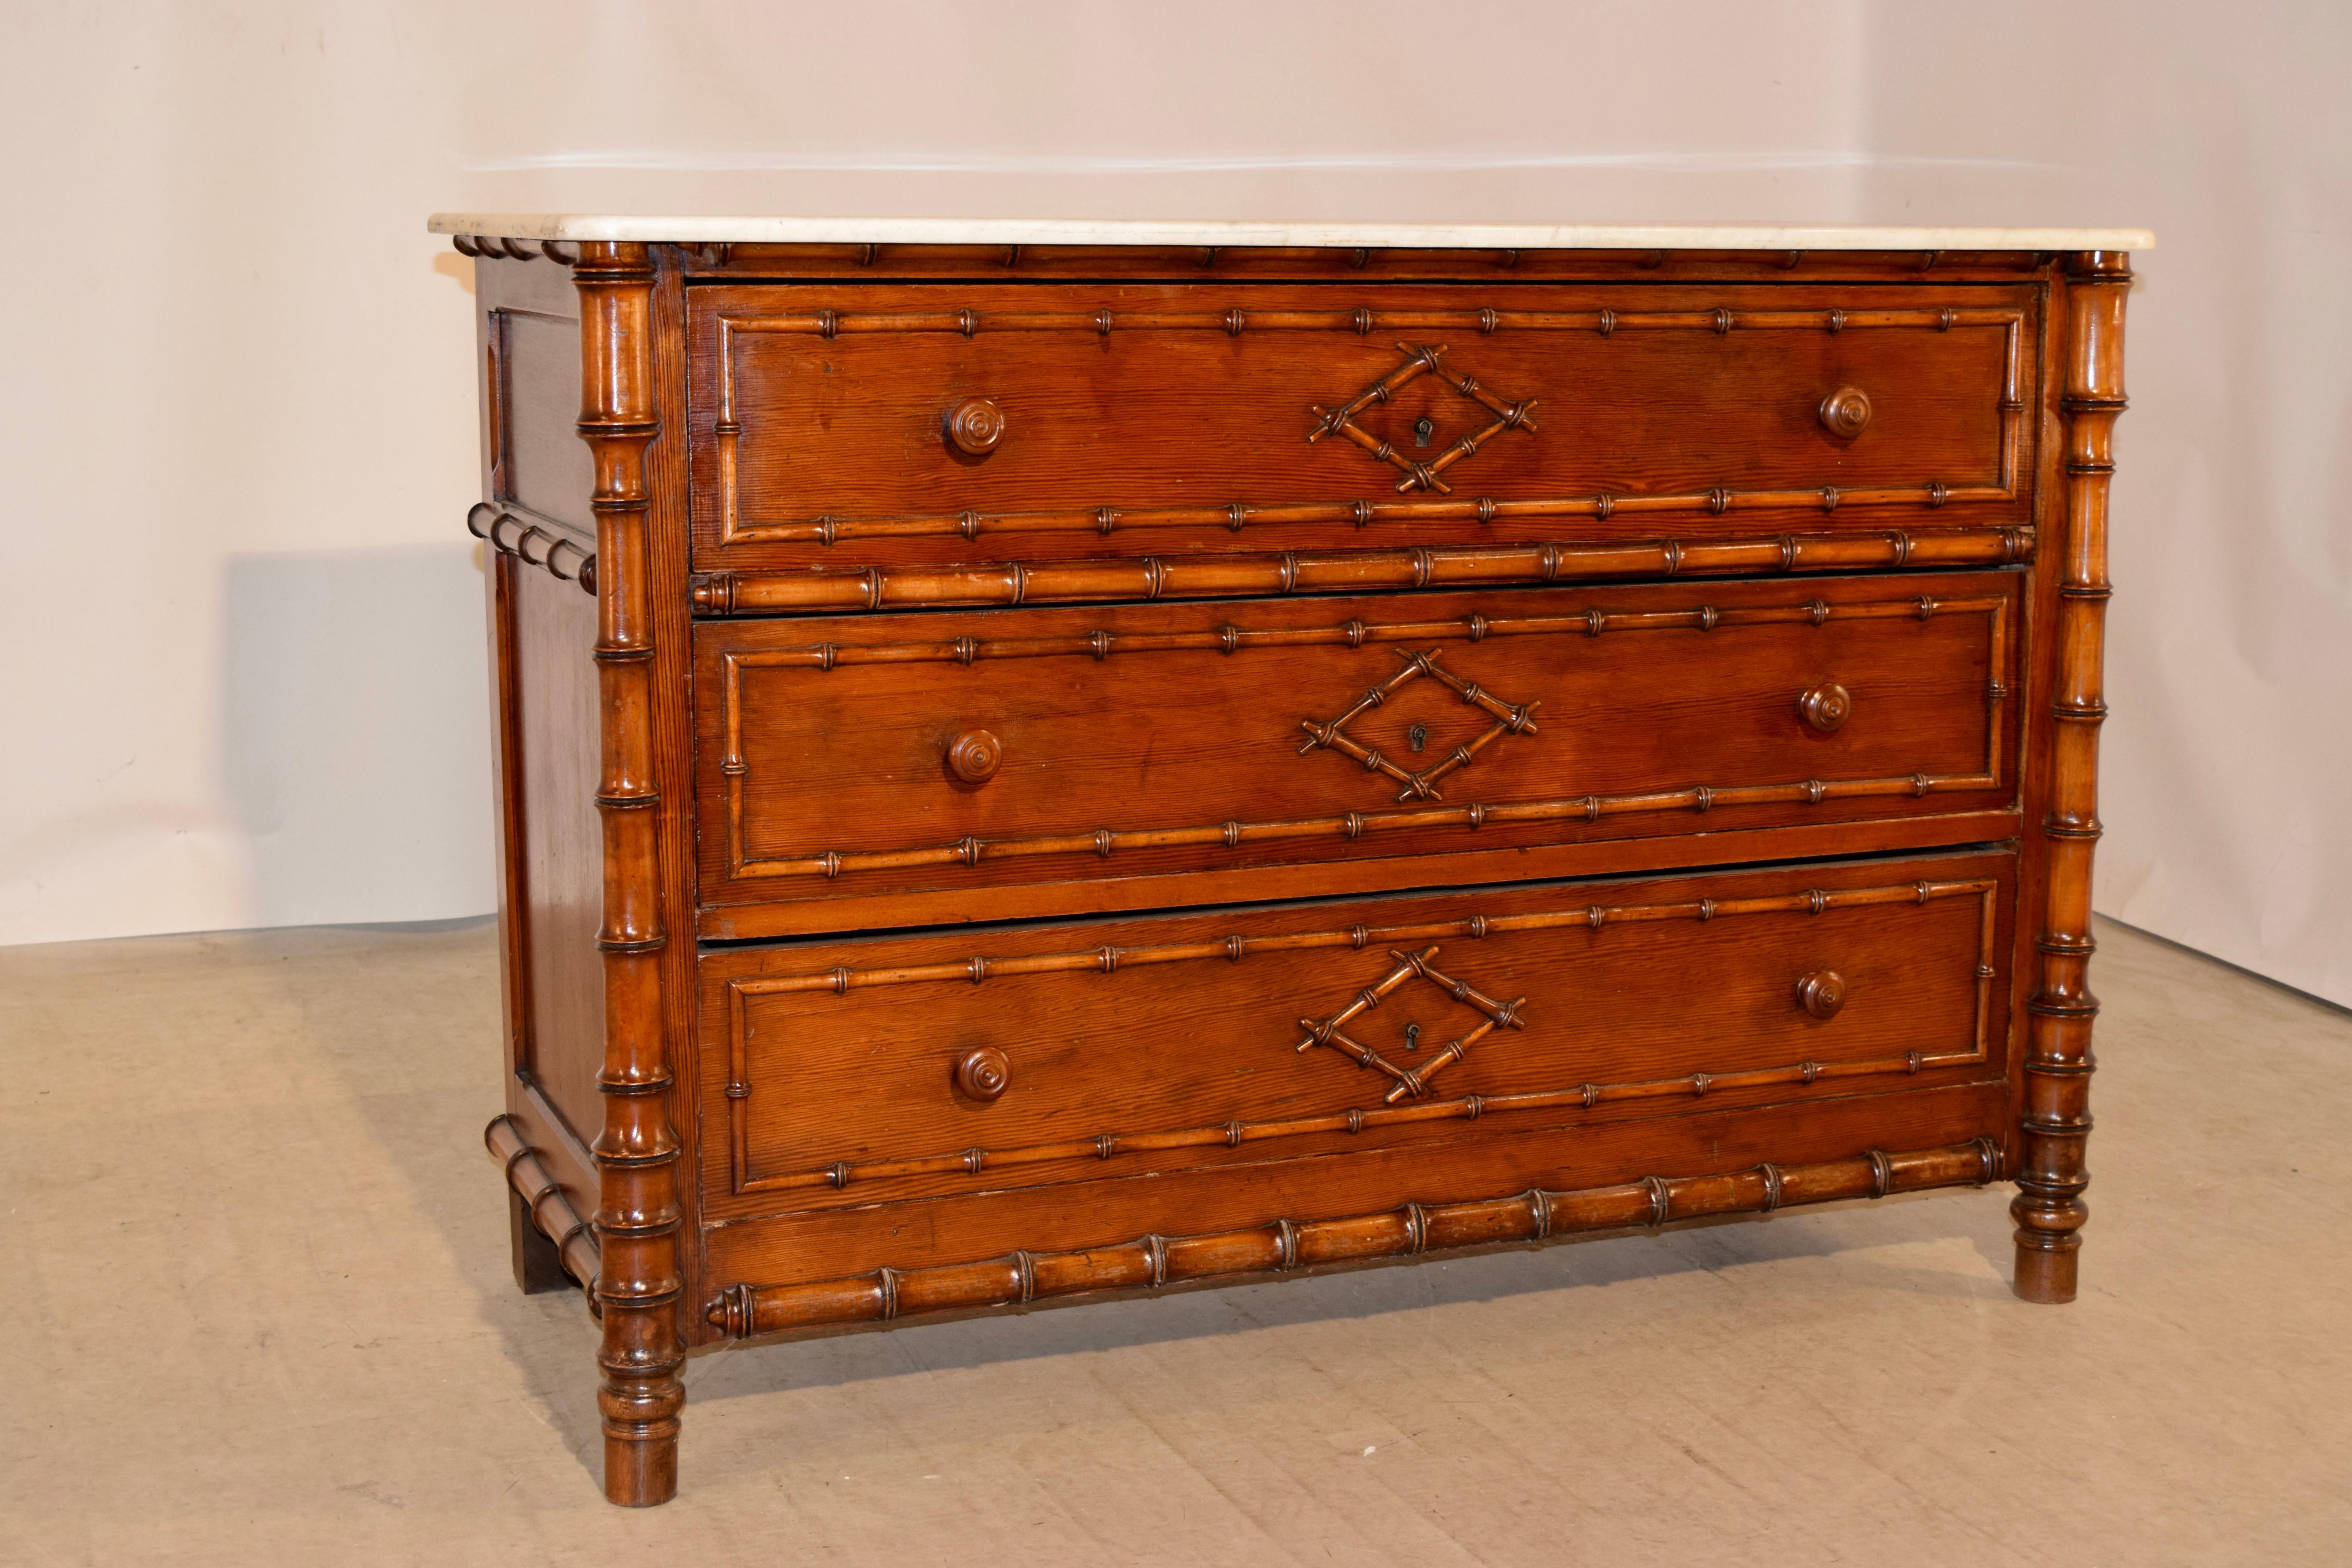 19th Century French Faux Bamboo Chest of Drawers (19. Jahrhundert)